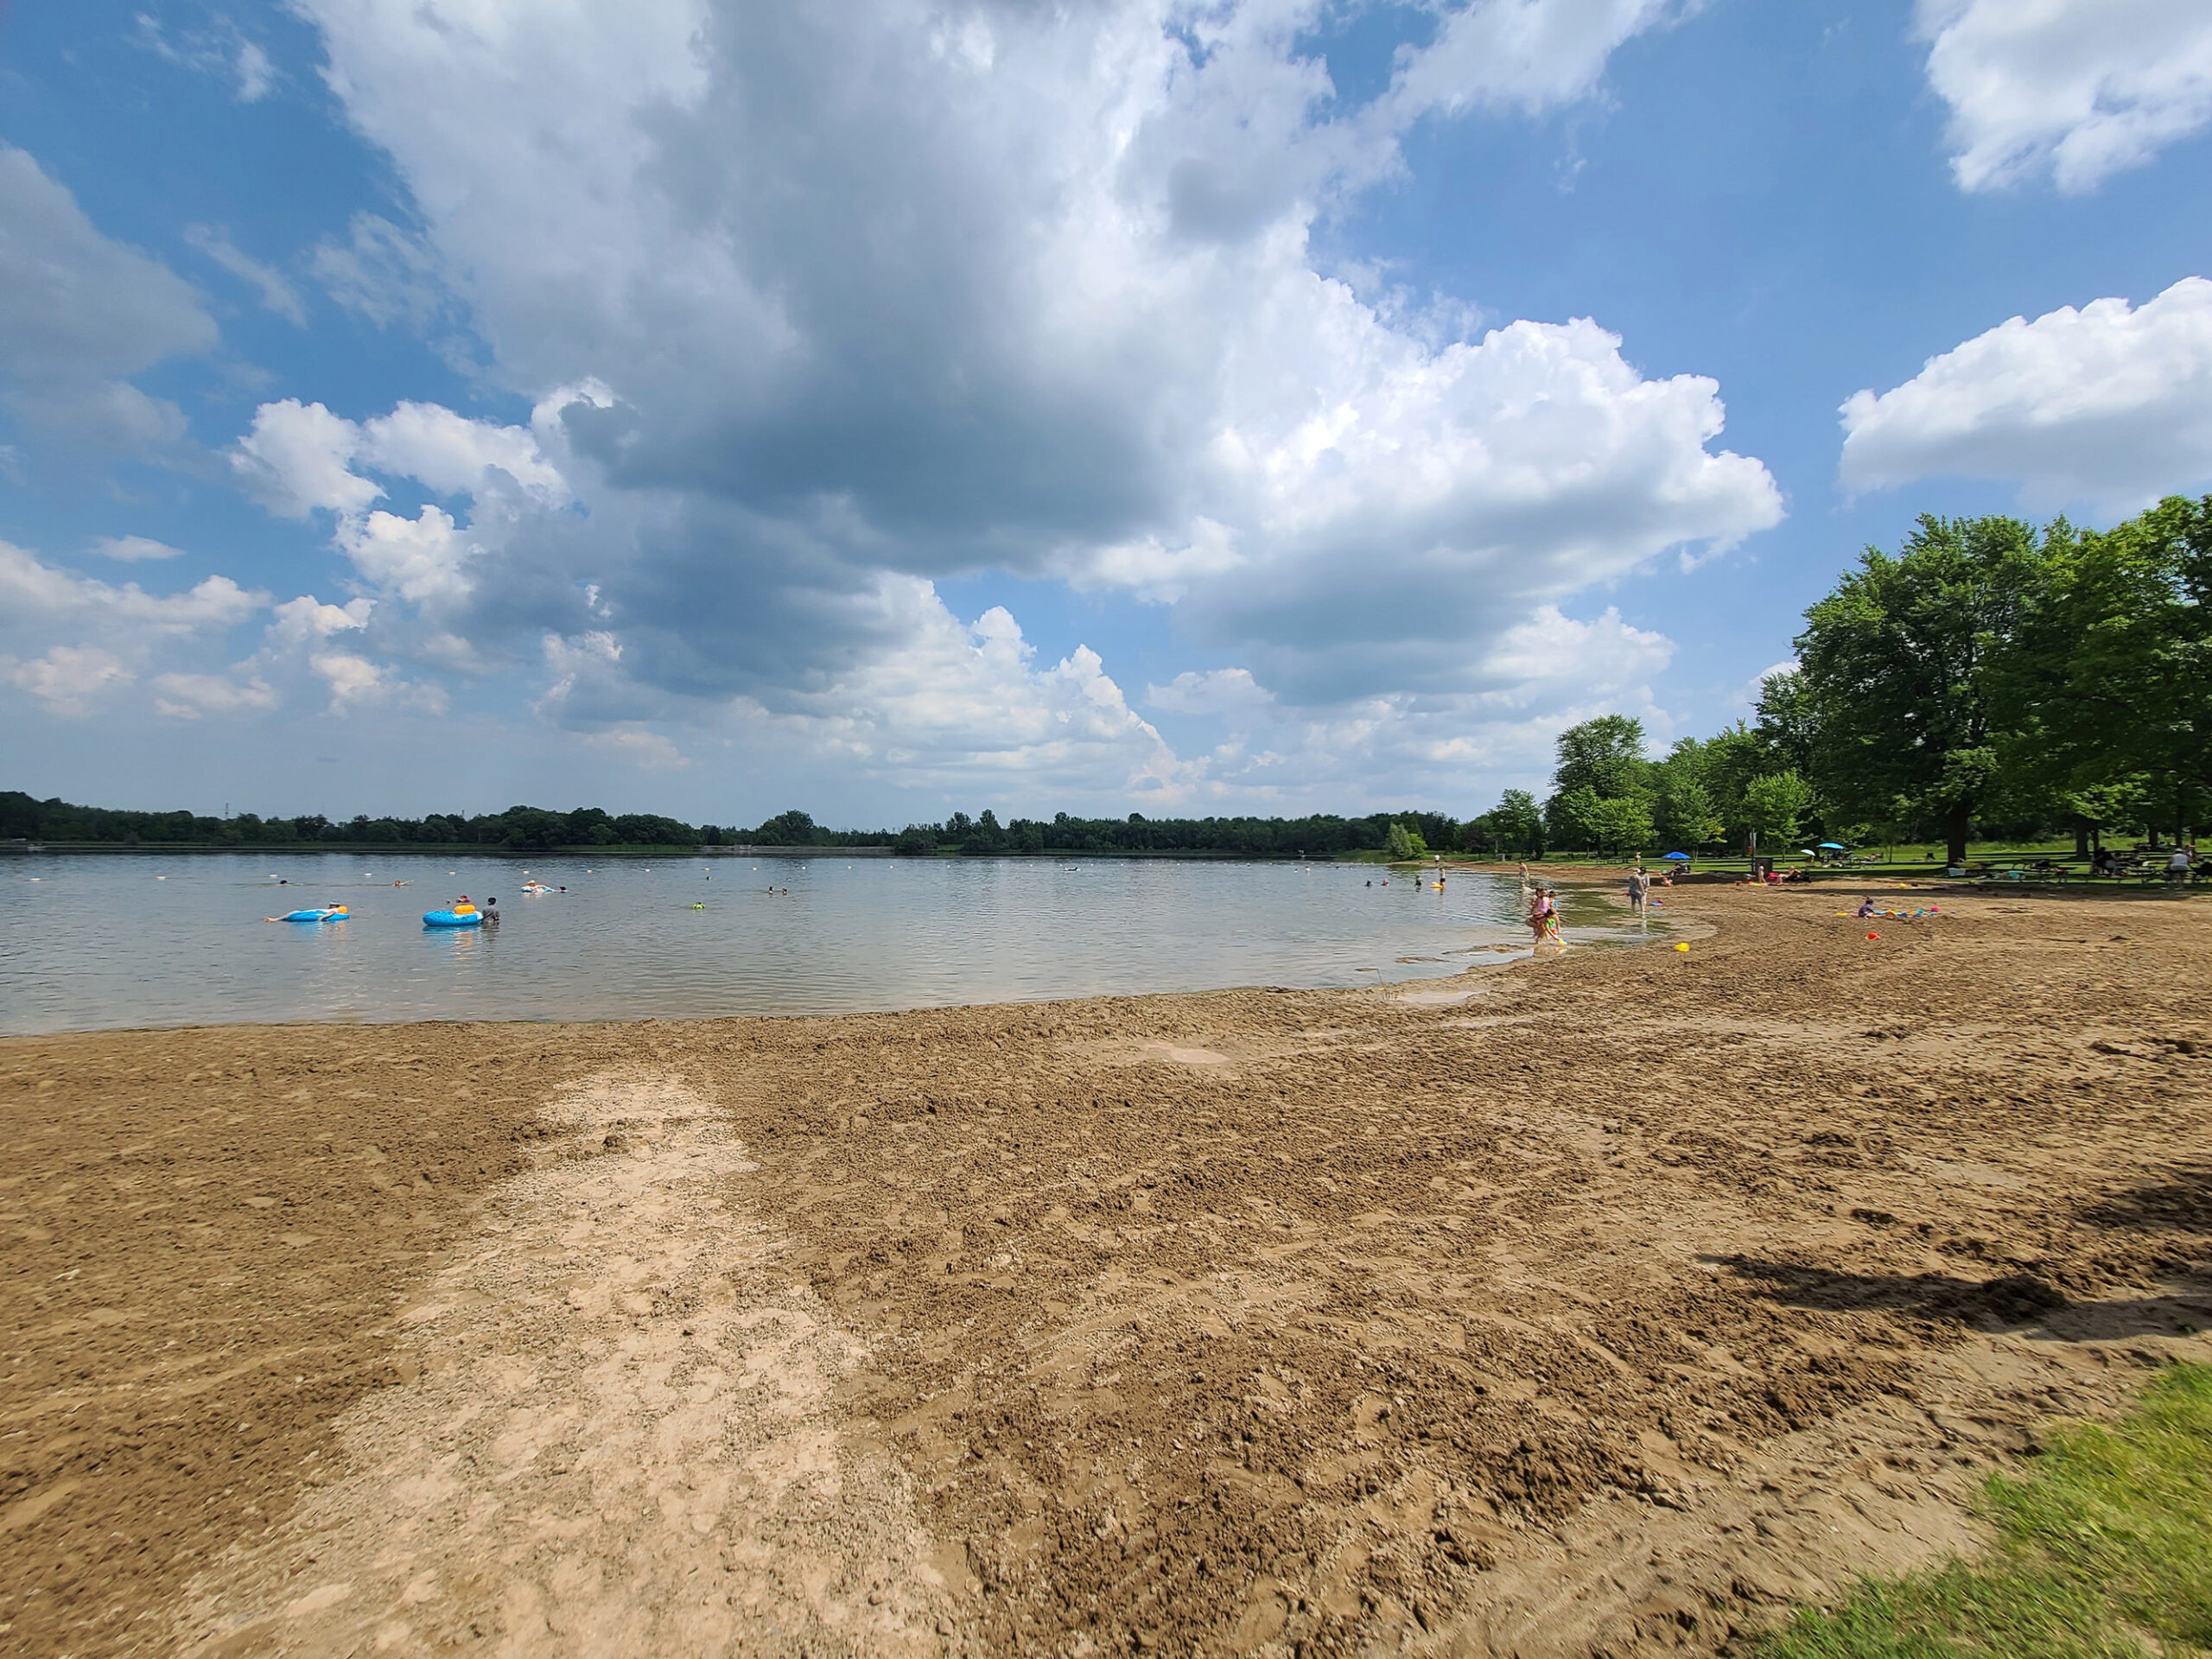 A long, wide sandy beach, There are a few people playing in the water.